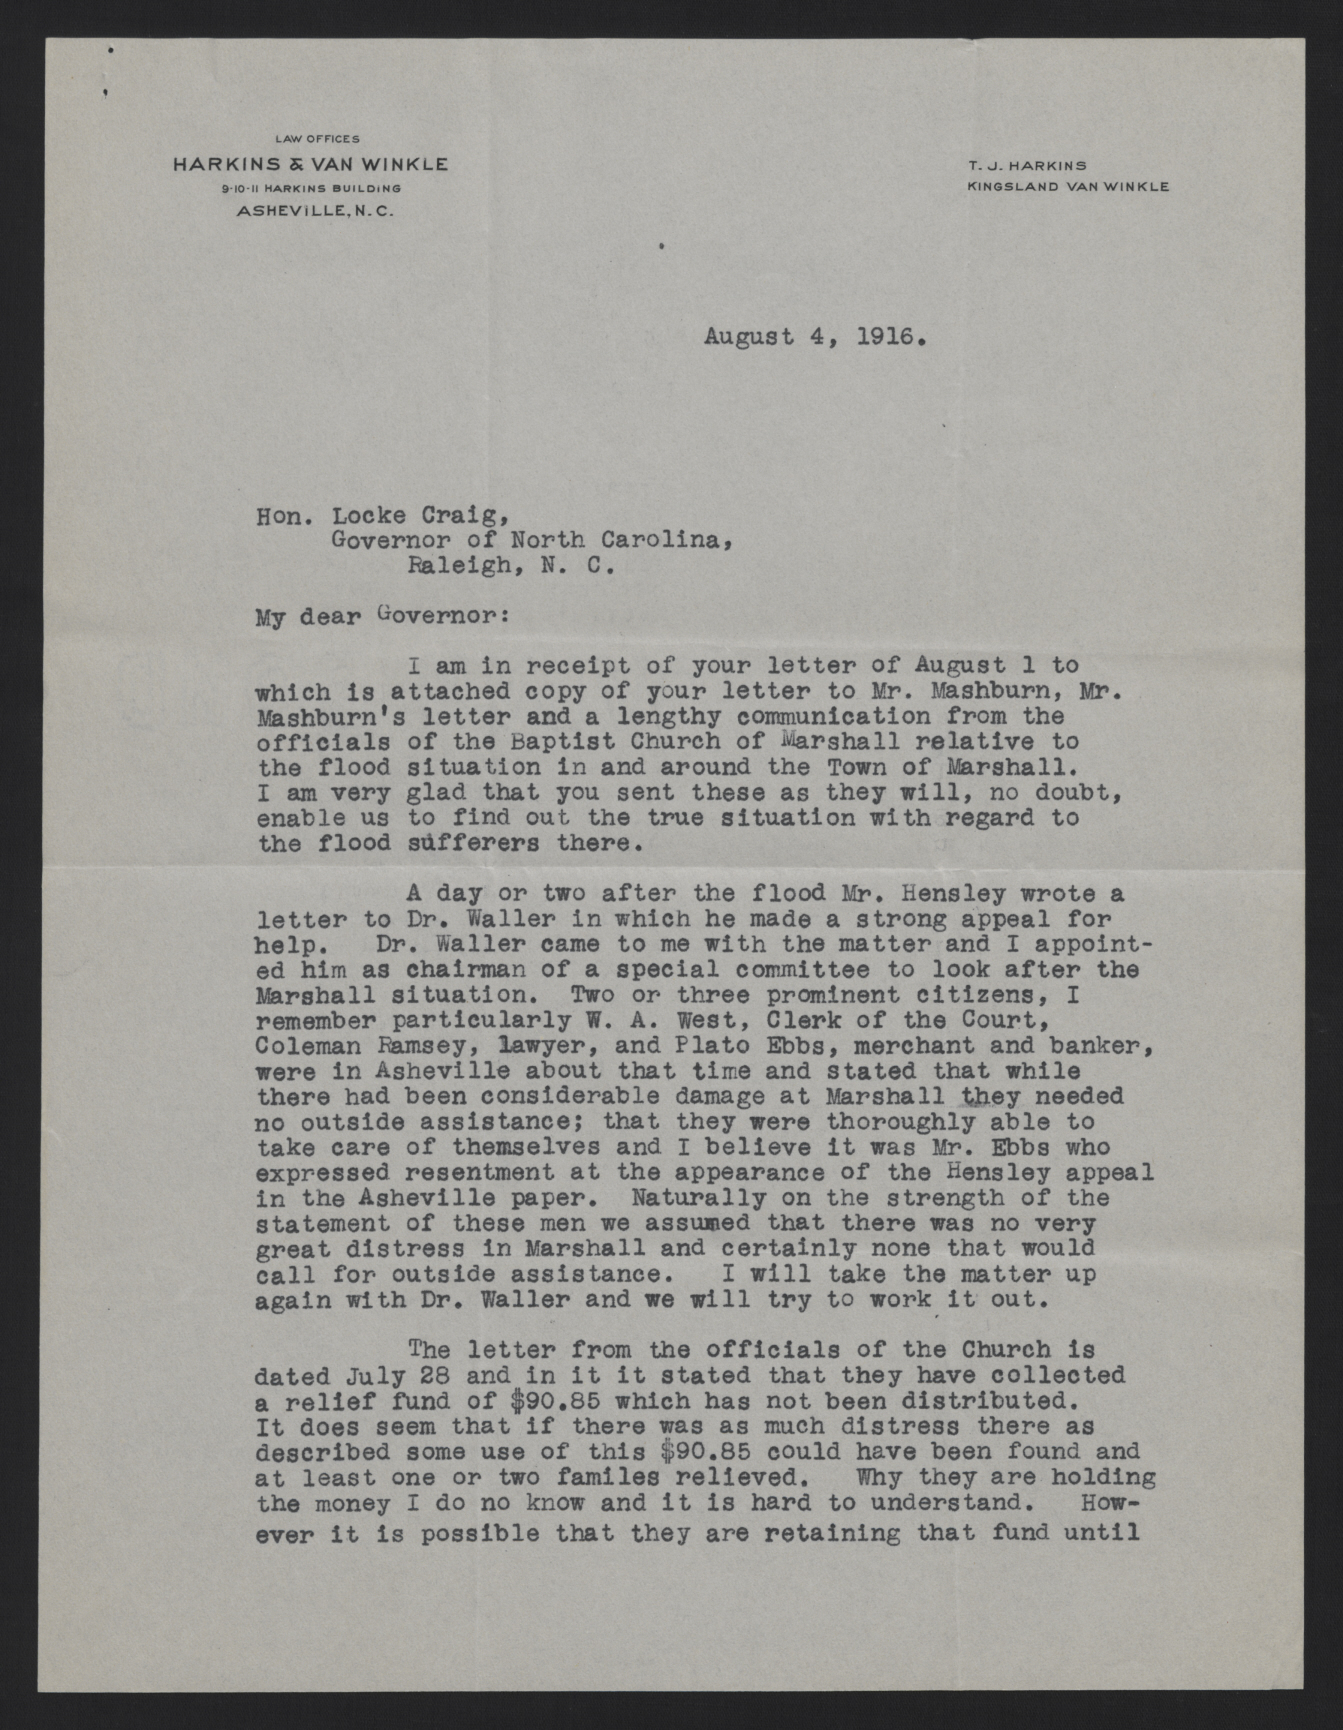 Letter from Harkins to Craig, August 4, 1916, page 1